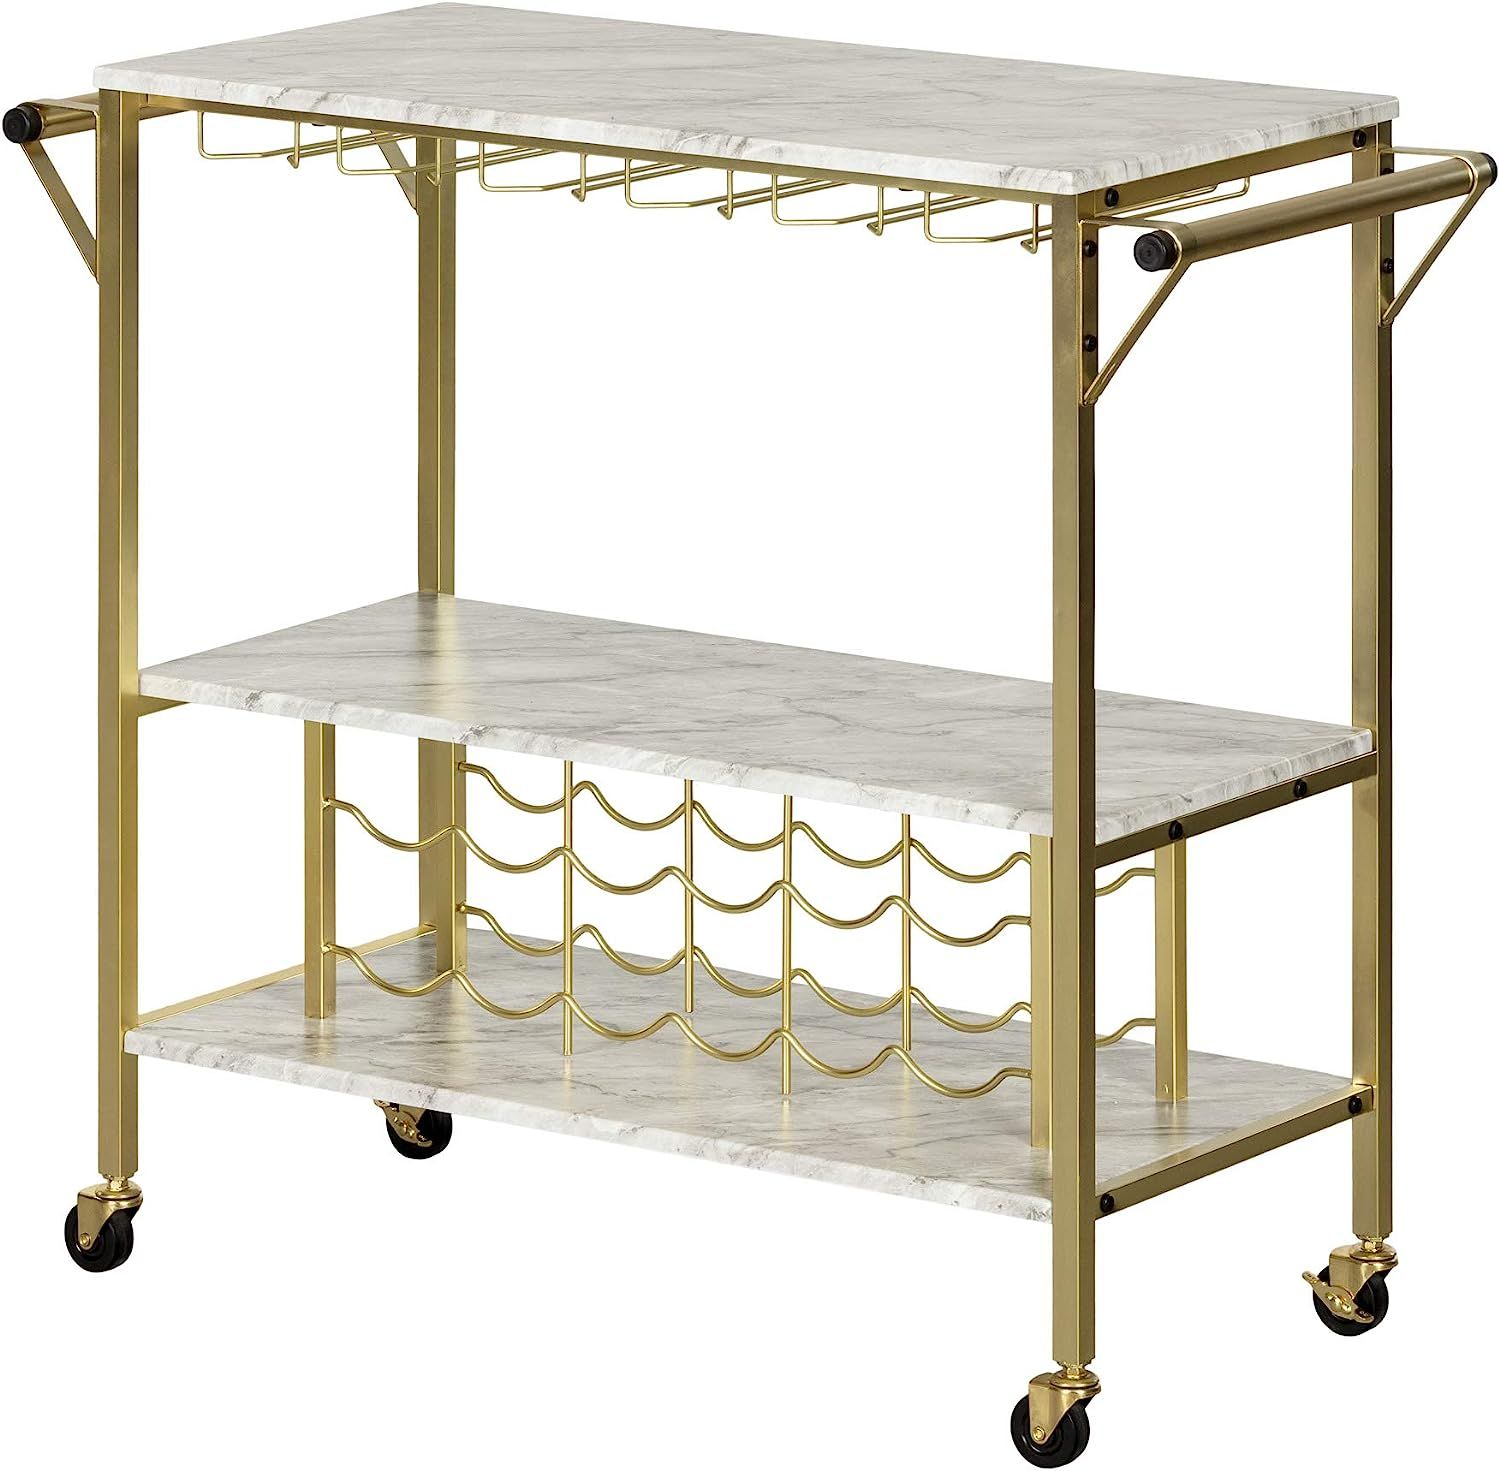 South Shore Maliza Bar Cart Bottle Storage and Wine Glass Rack-Faux Marble and Gold | Amazon (US)